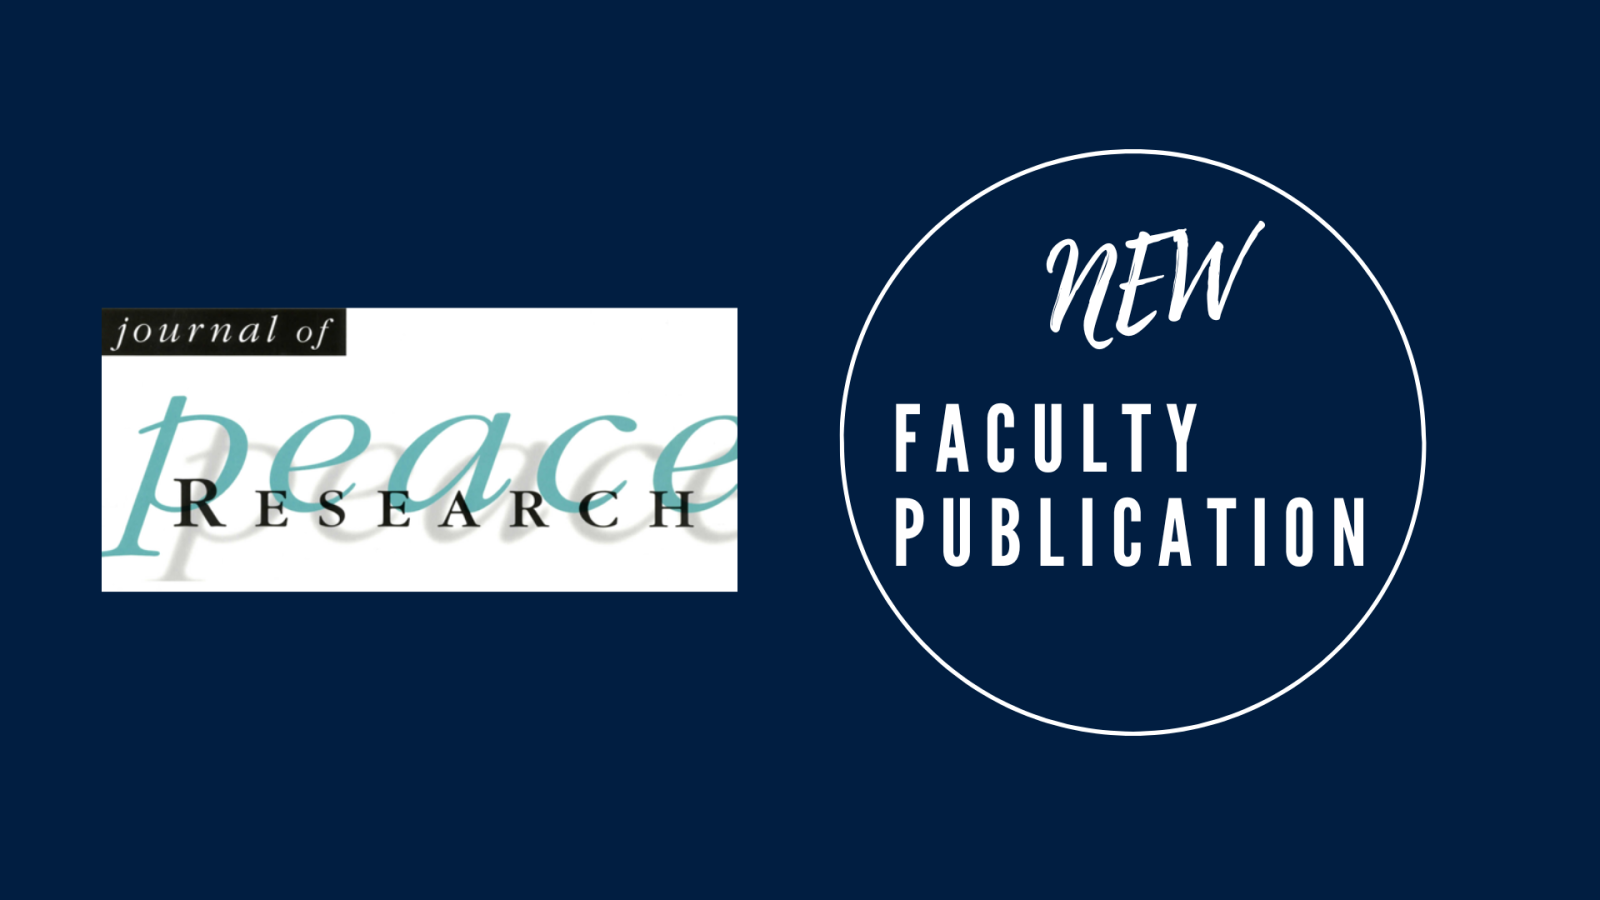 Banner that says New Faculty Publications and features journal logo